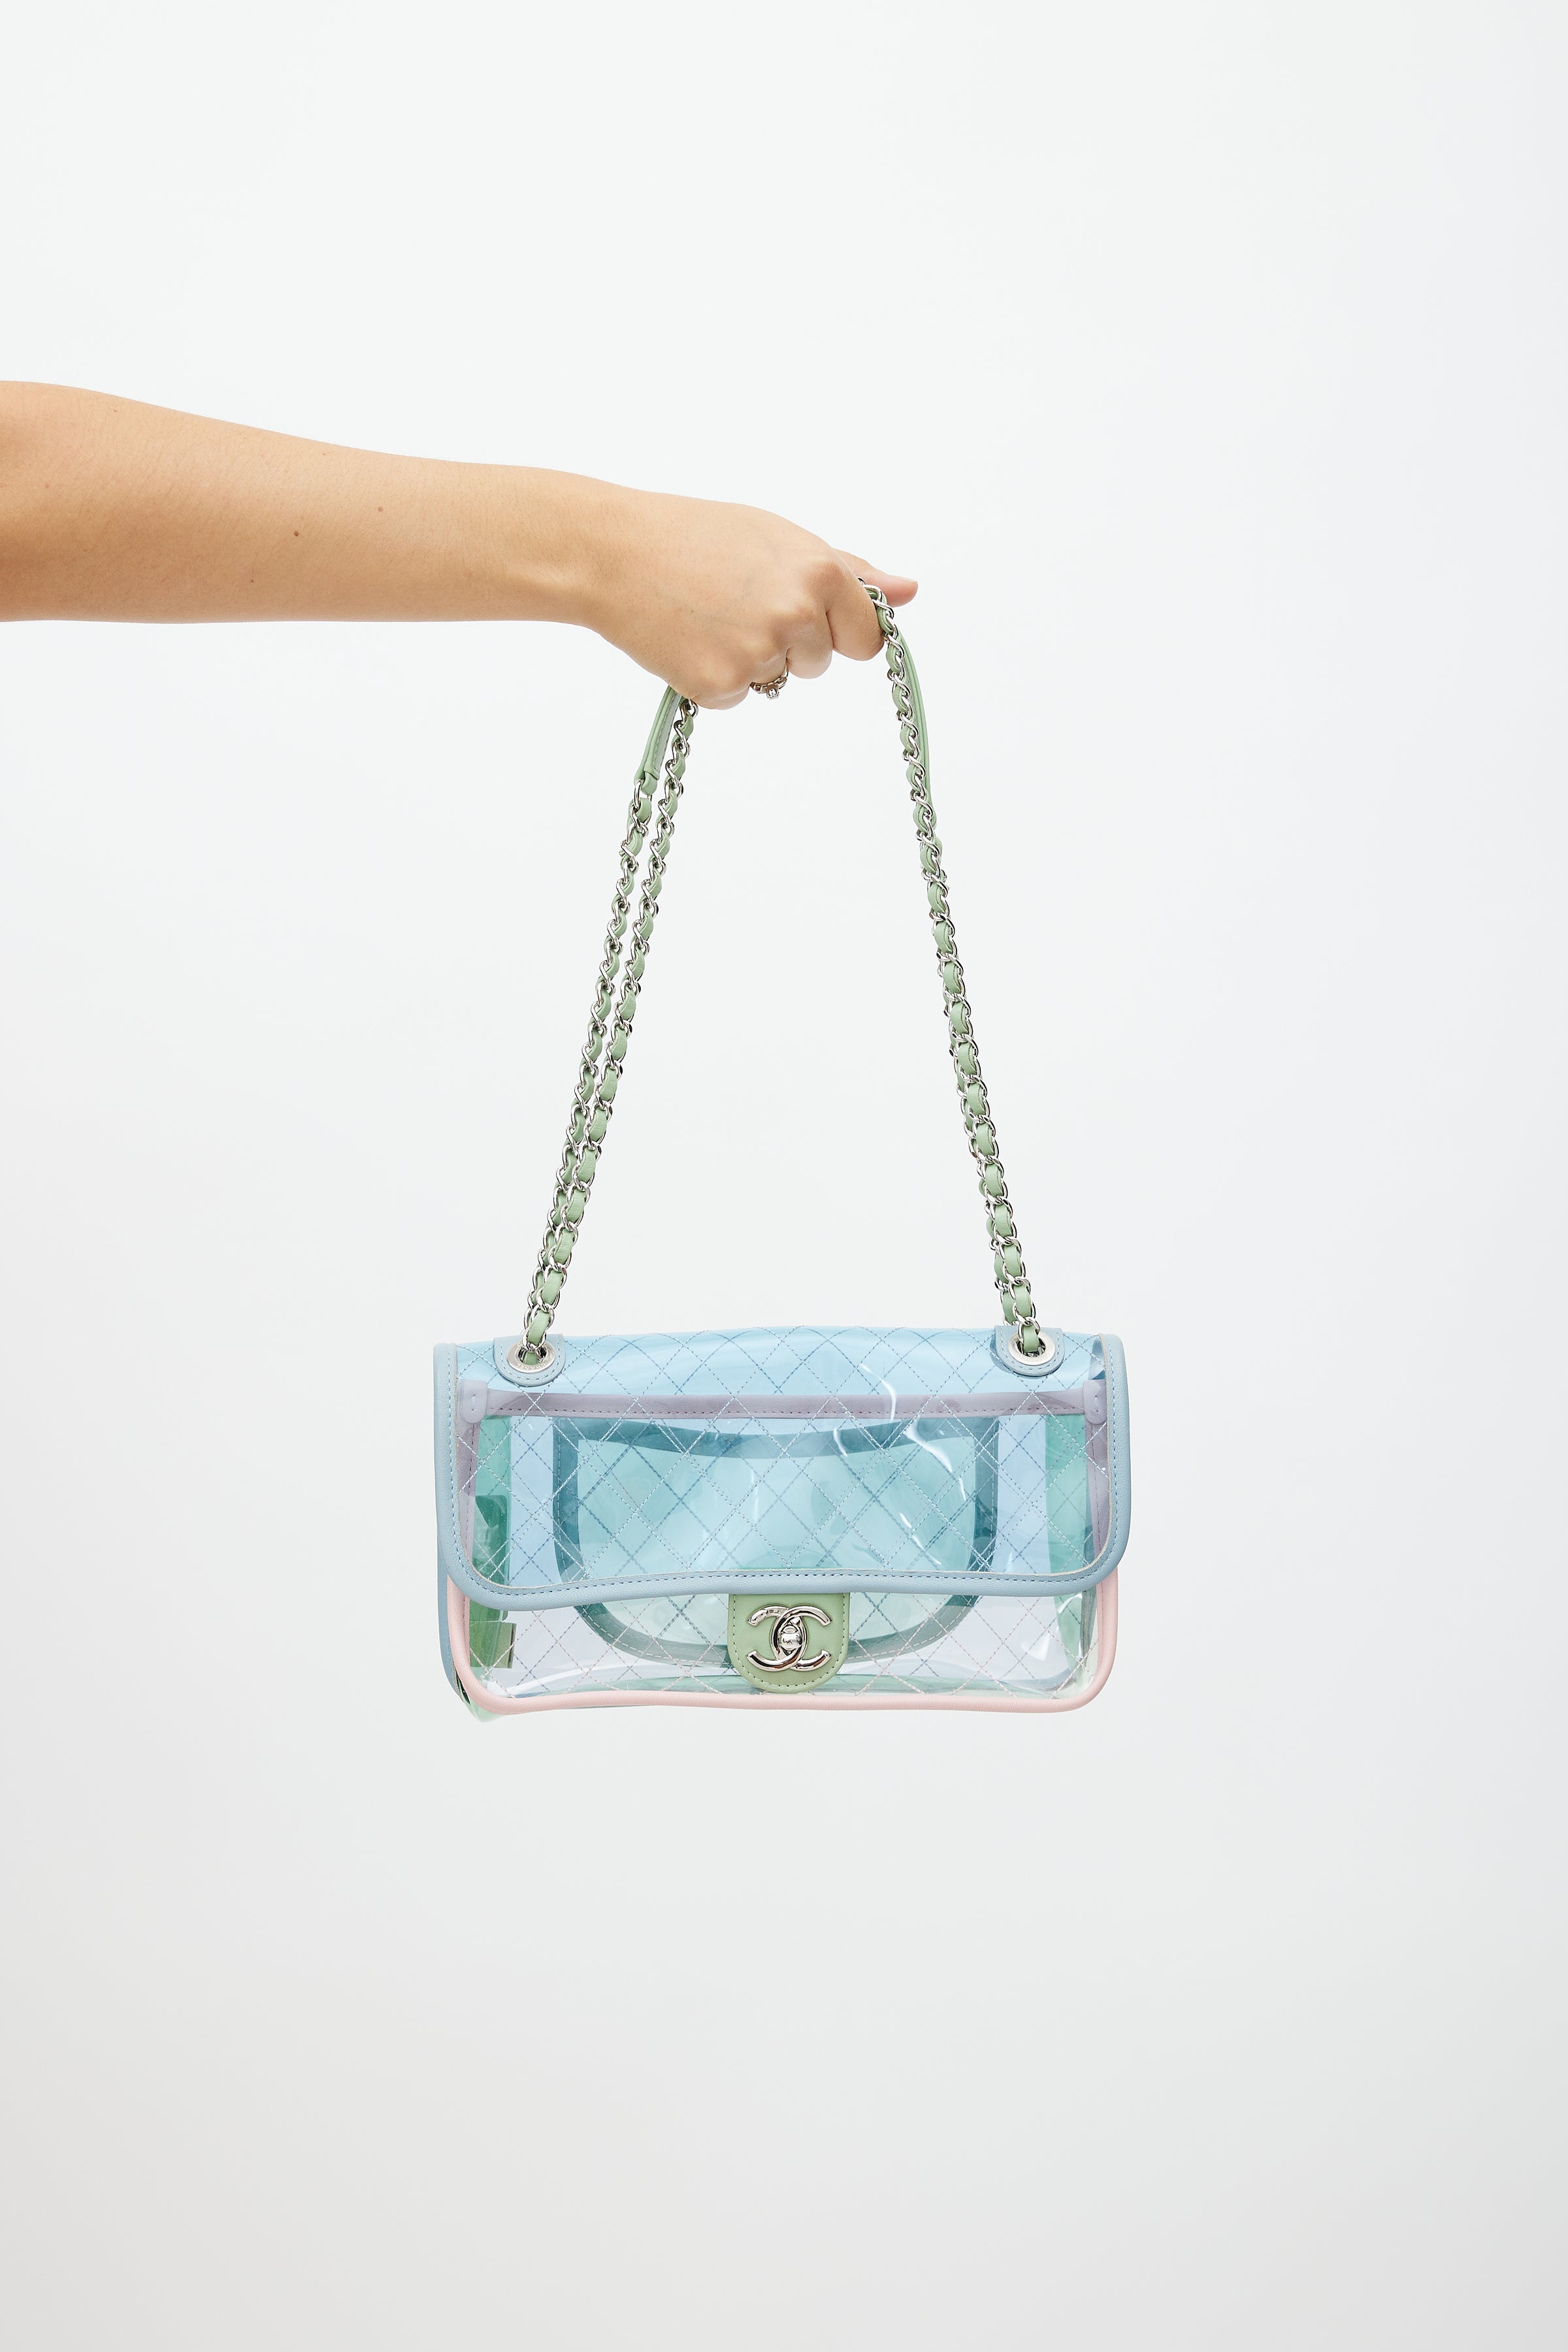 Chanel Blue Transparent Quilted PVC Coco Splash Small Flap Bag